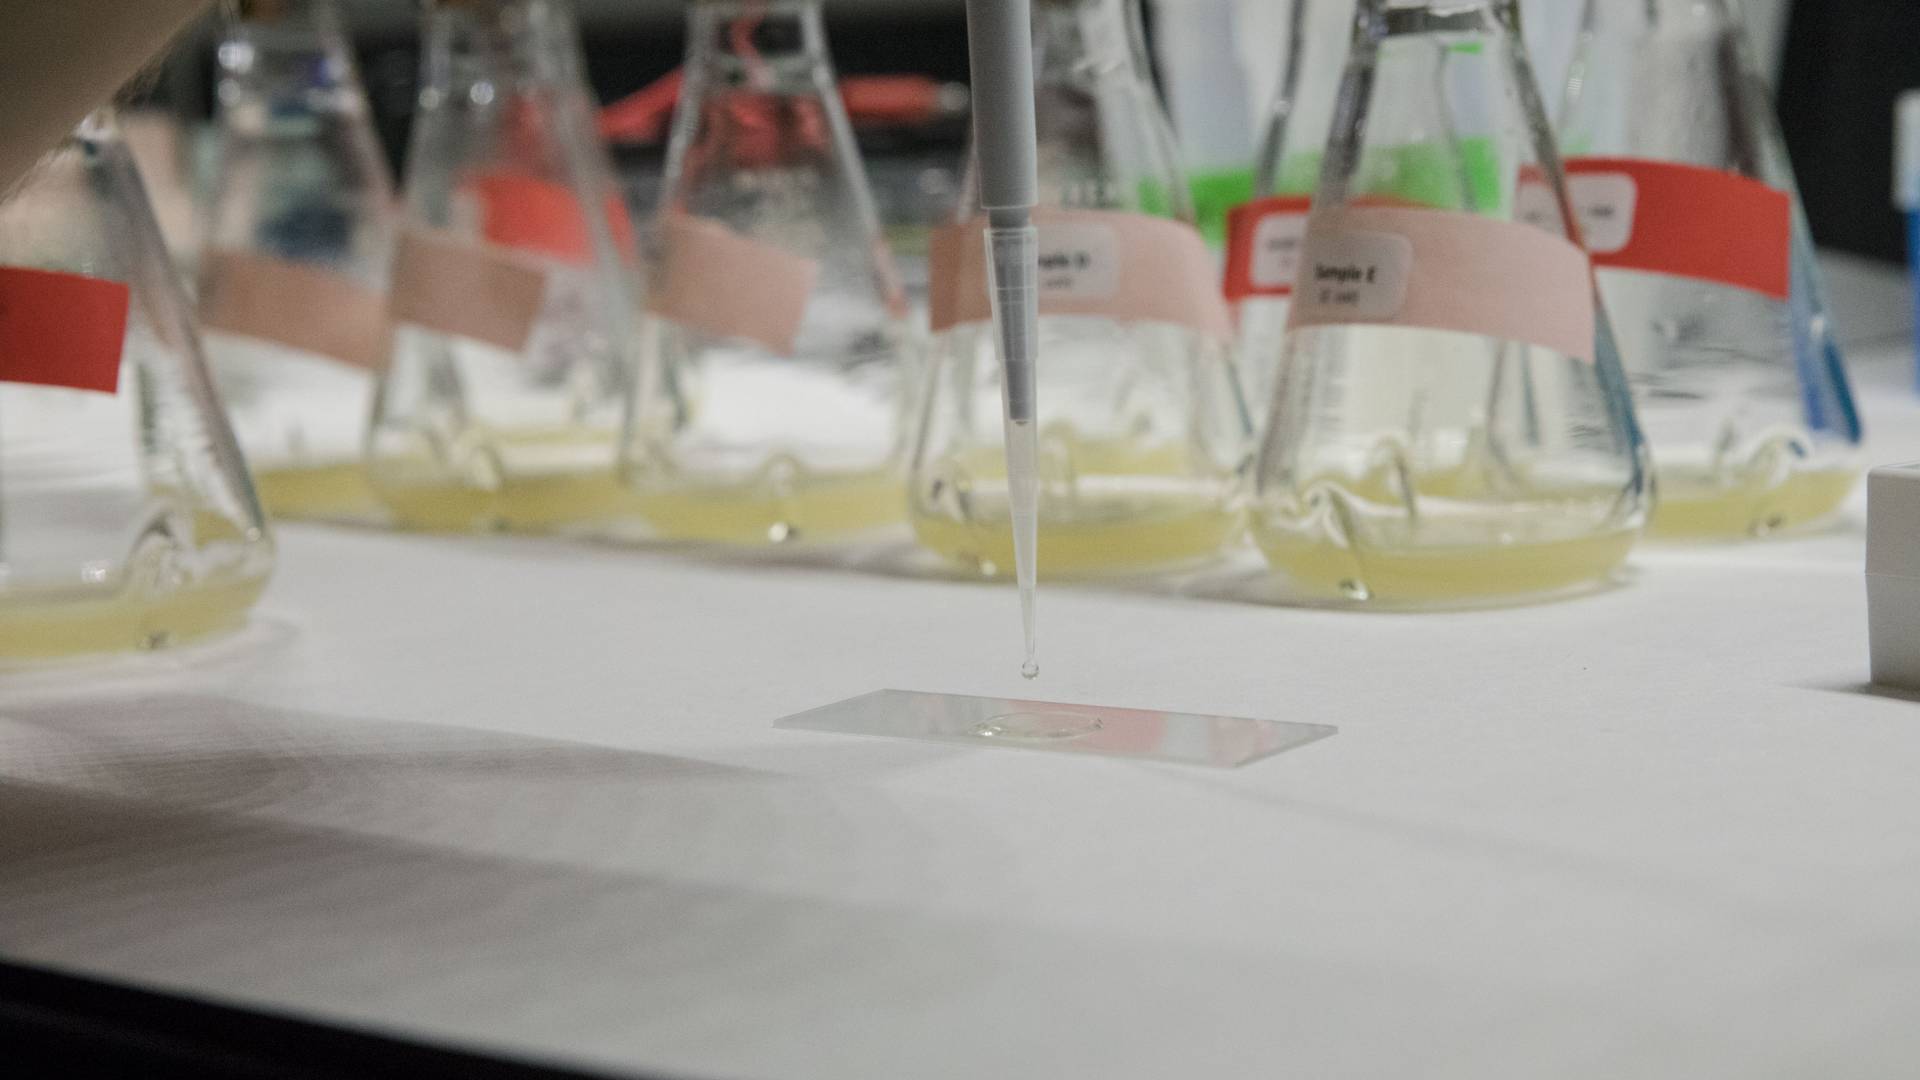 Liquid dropping from syringe, with glass beakers in background